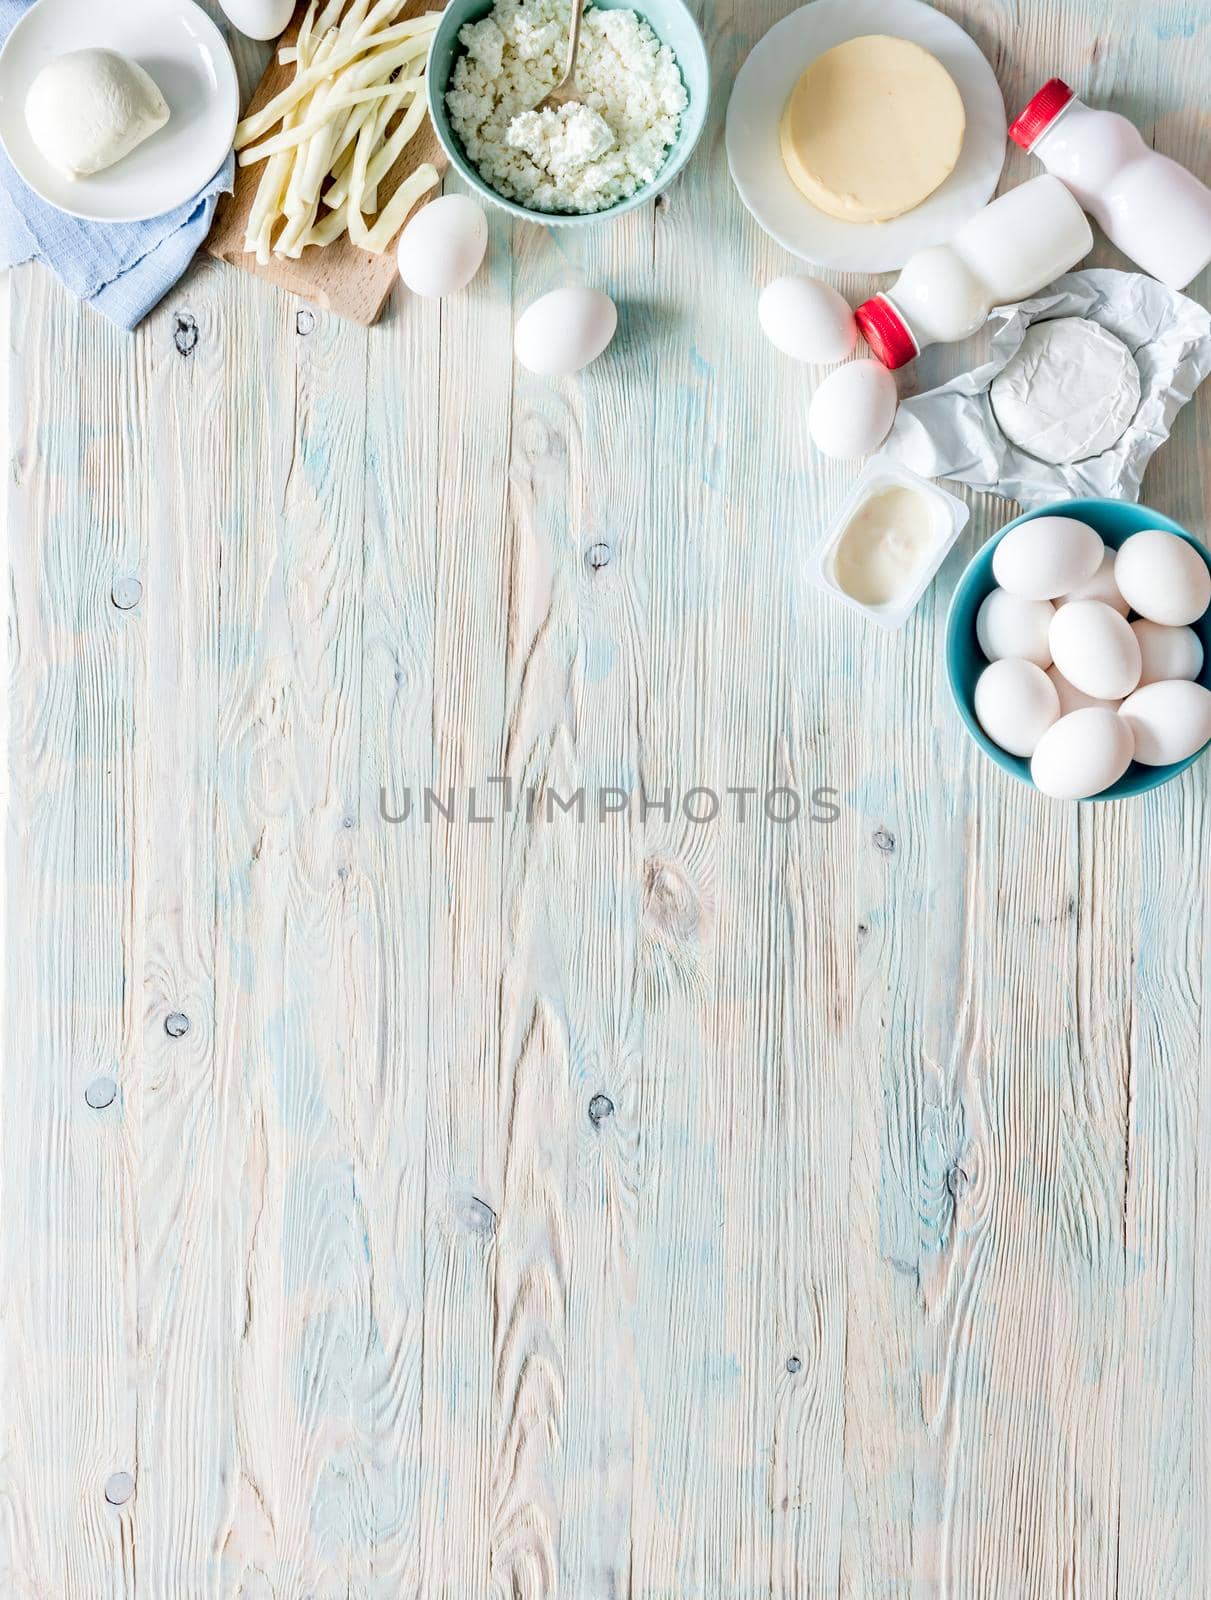 set of dairy products on wooden background with text space top view